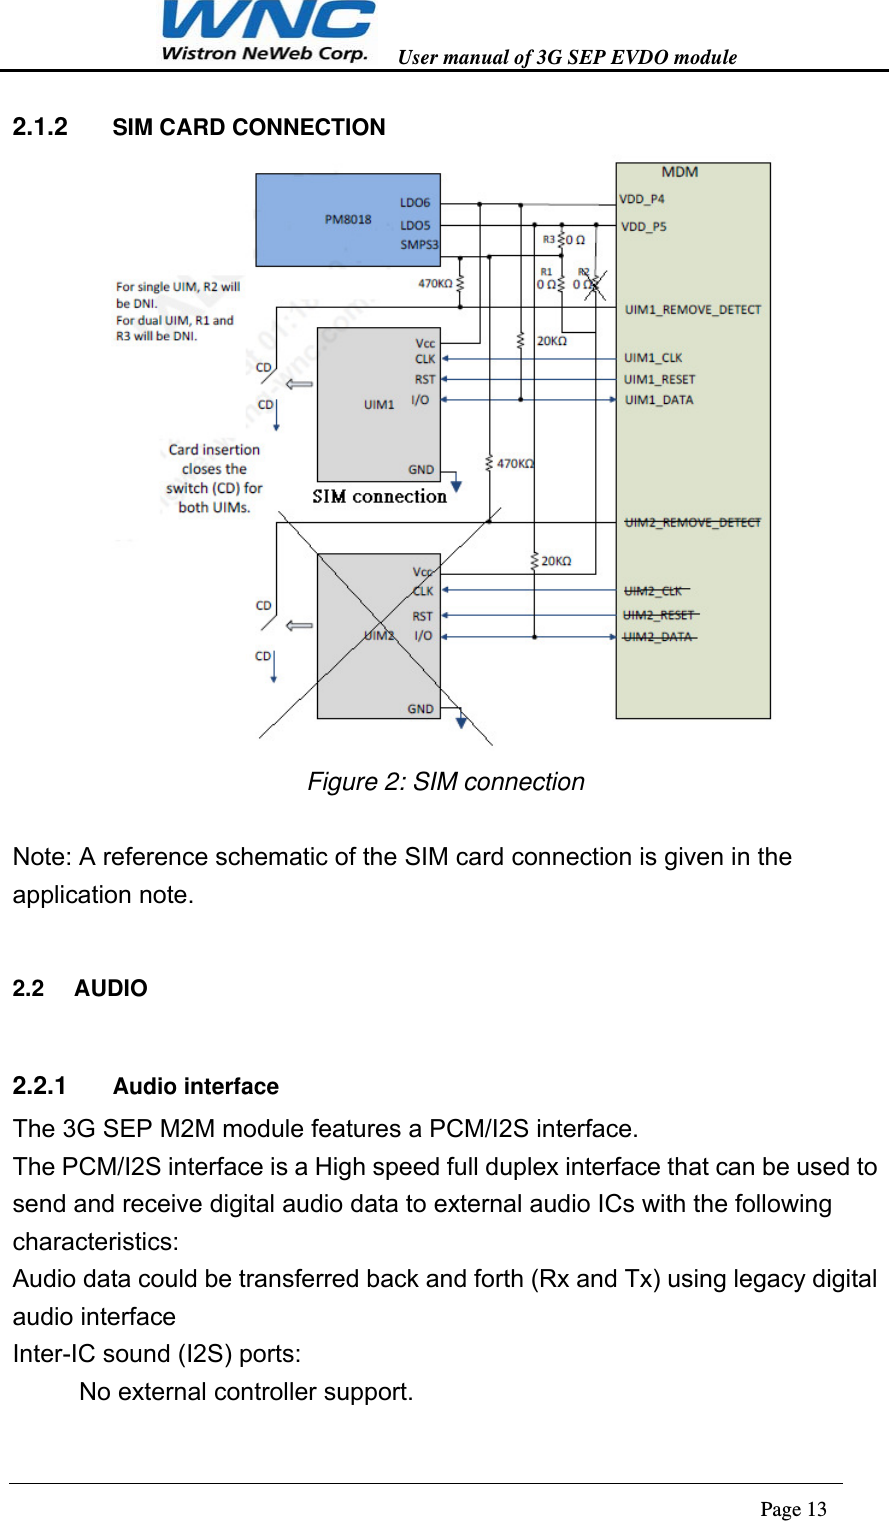   User manual of 3G SEP EVDO module                                                                      Page 13  2.1.2  SIM CARD CONNECTION  Figure 2: SIM connection  Note: A reference schematic of the SIM card connection is given in the application note. 2.2  AUDIO 2.2.1  Audio interface The 3G SEP M2M module features a PCM/I2S interface.   The PCM/I2S interface is a High speed full duplex interface that can be used to send and receive digital audio data to external audio ICs with the following characteristics: Audio data could be transferred back and forth (Rx and Tx) using legacy digital audio interface Inter-IC sound (I2S) ports: 　No external controller support. 